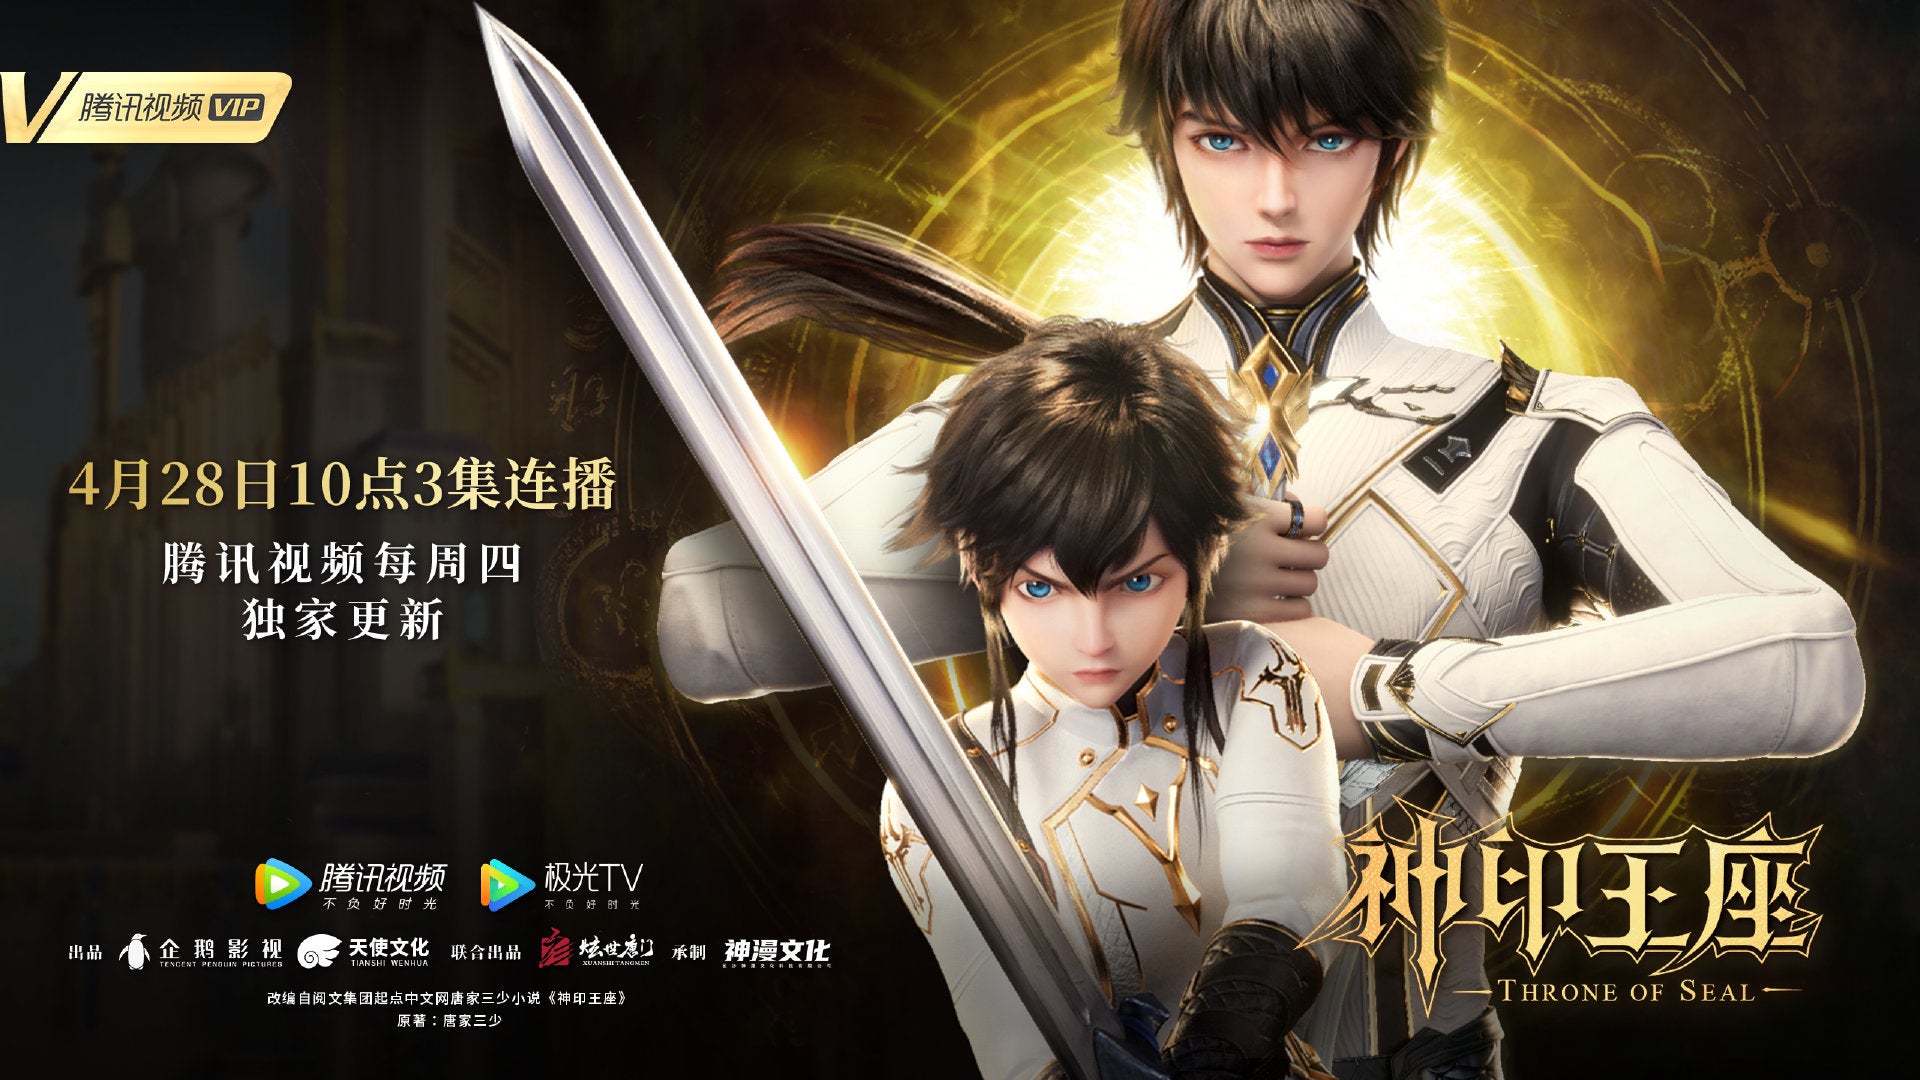 Throne of Seal donghua is scheduled for release on April 2022